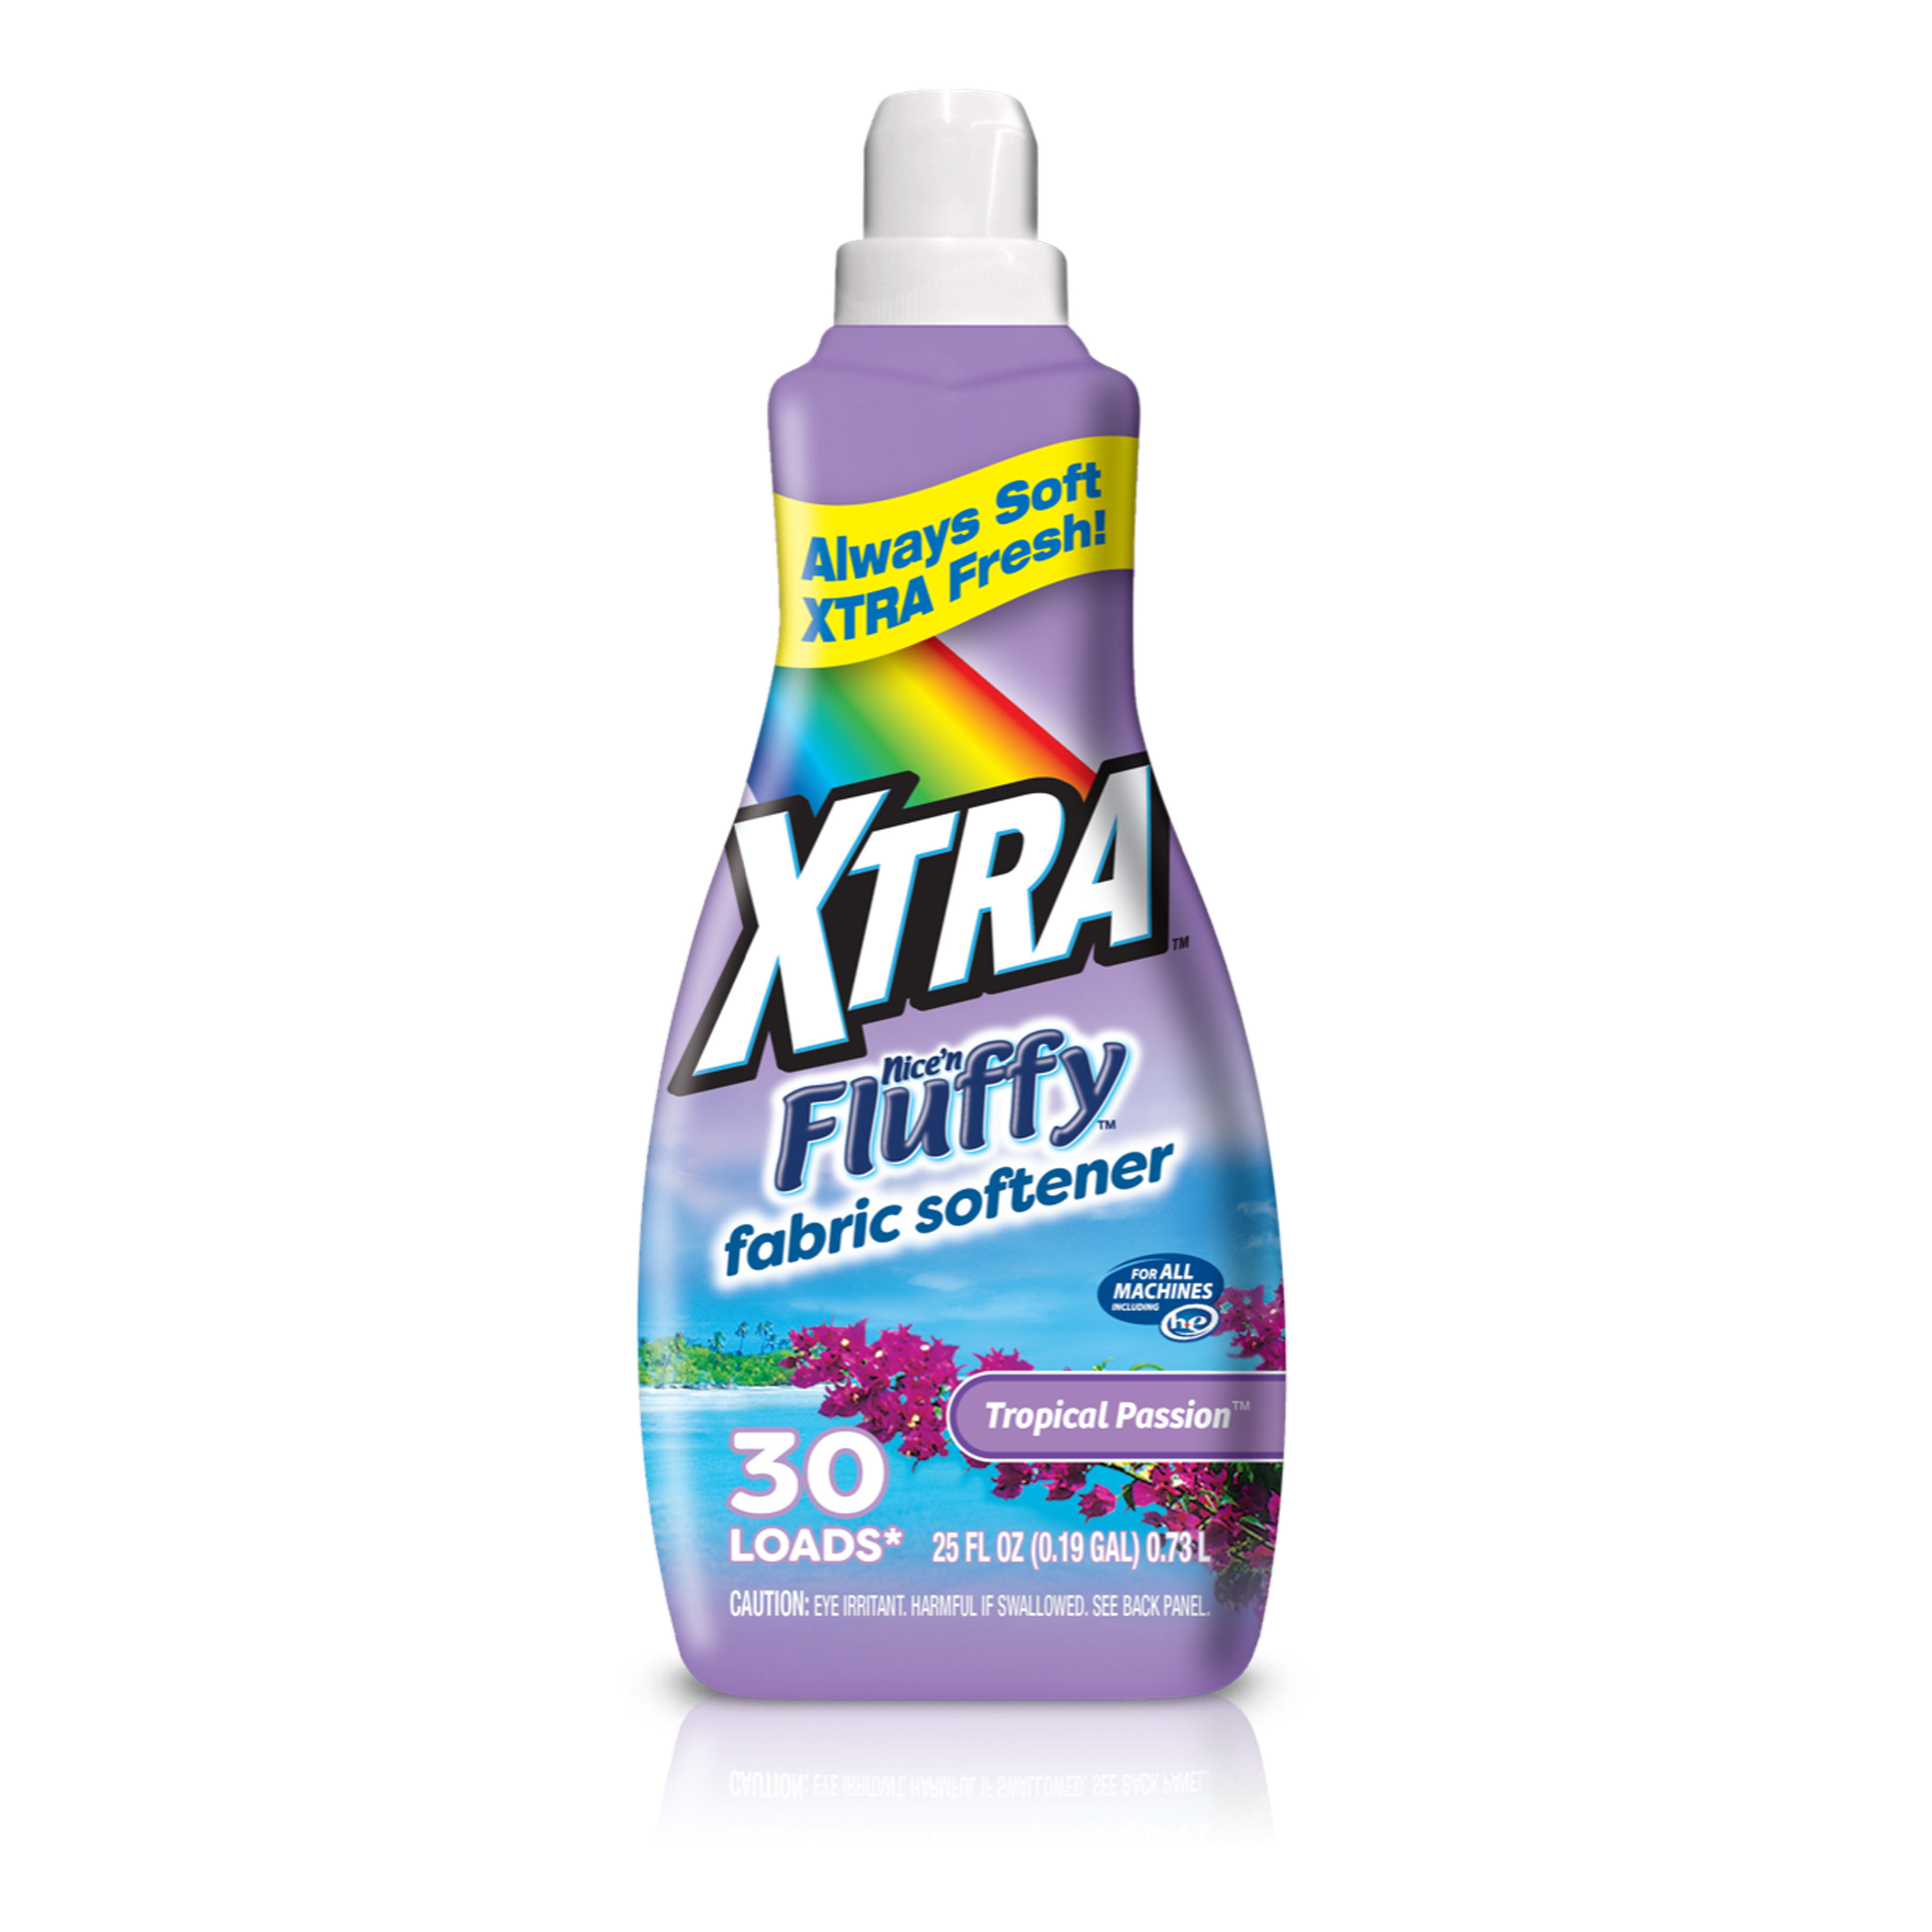 XTRA Nice'N Fluffy 25 oz. Fabric Softener, Tropical Passion